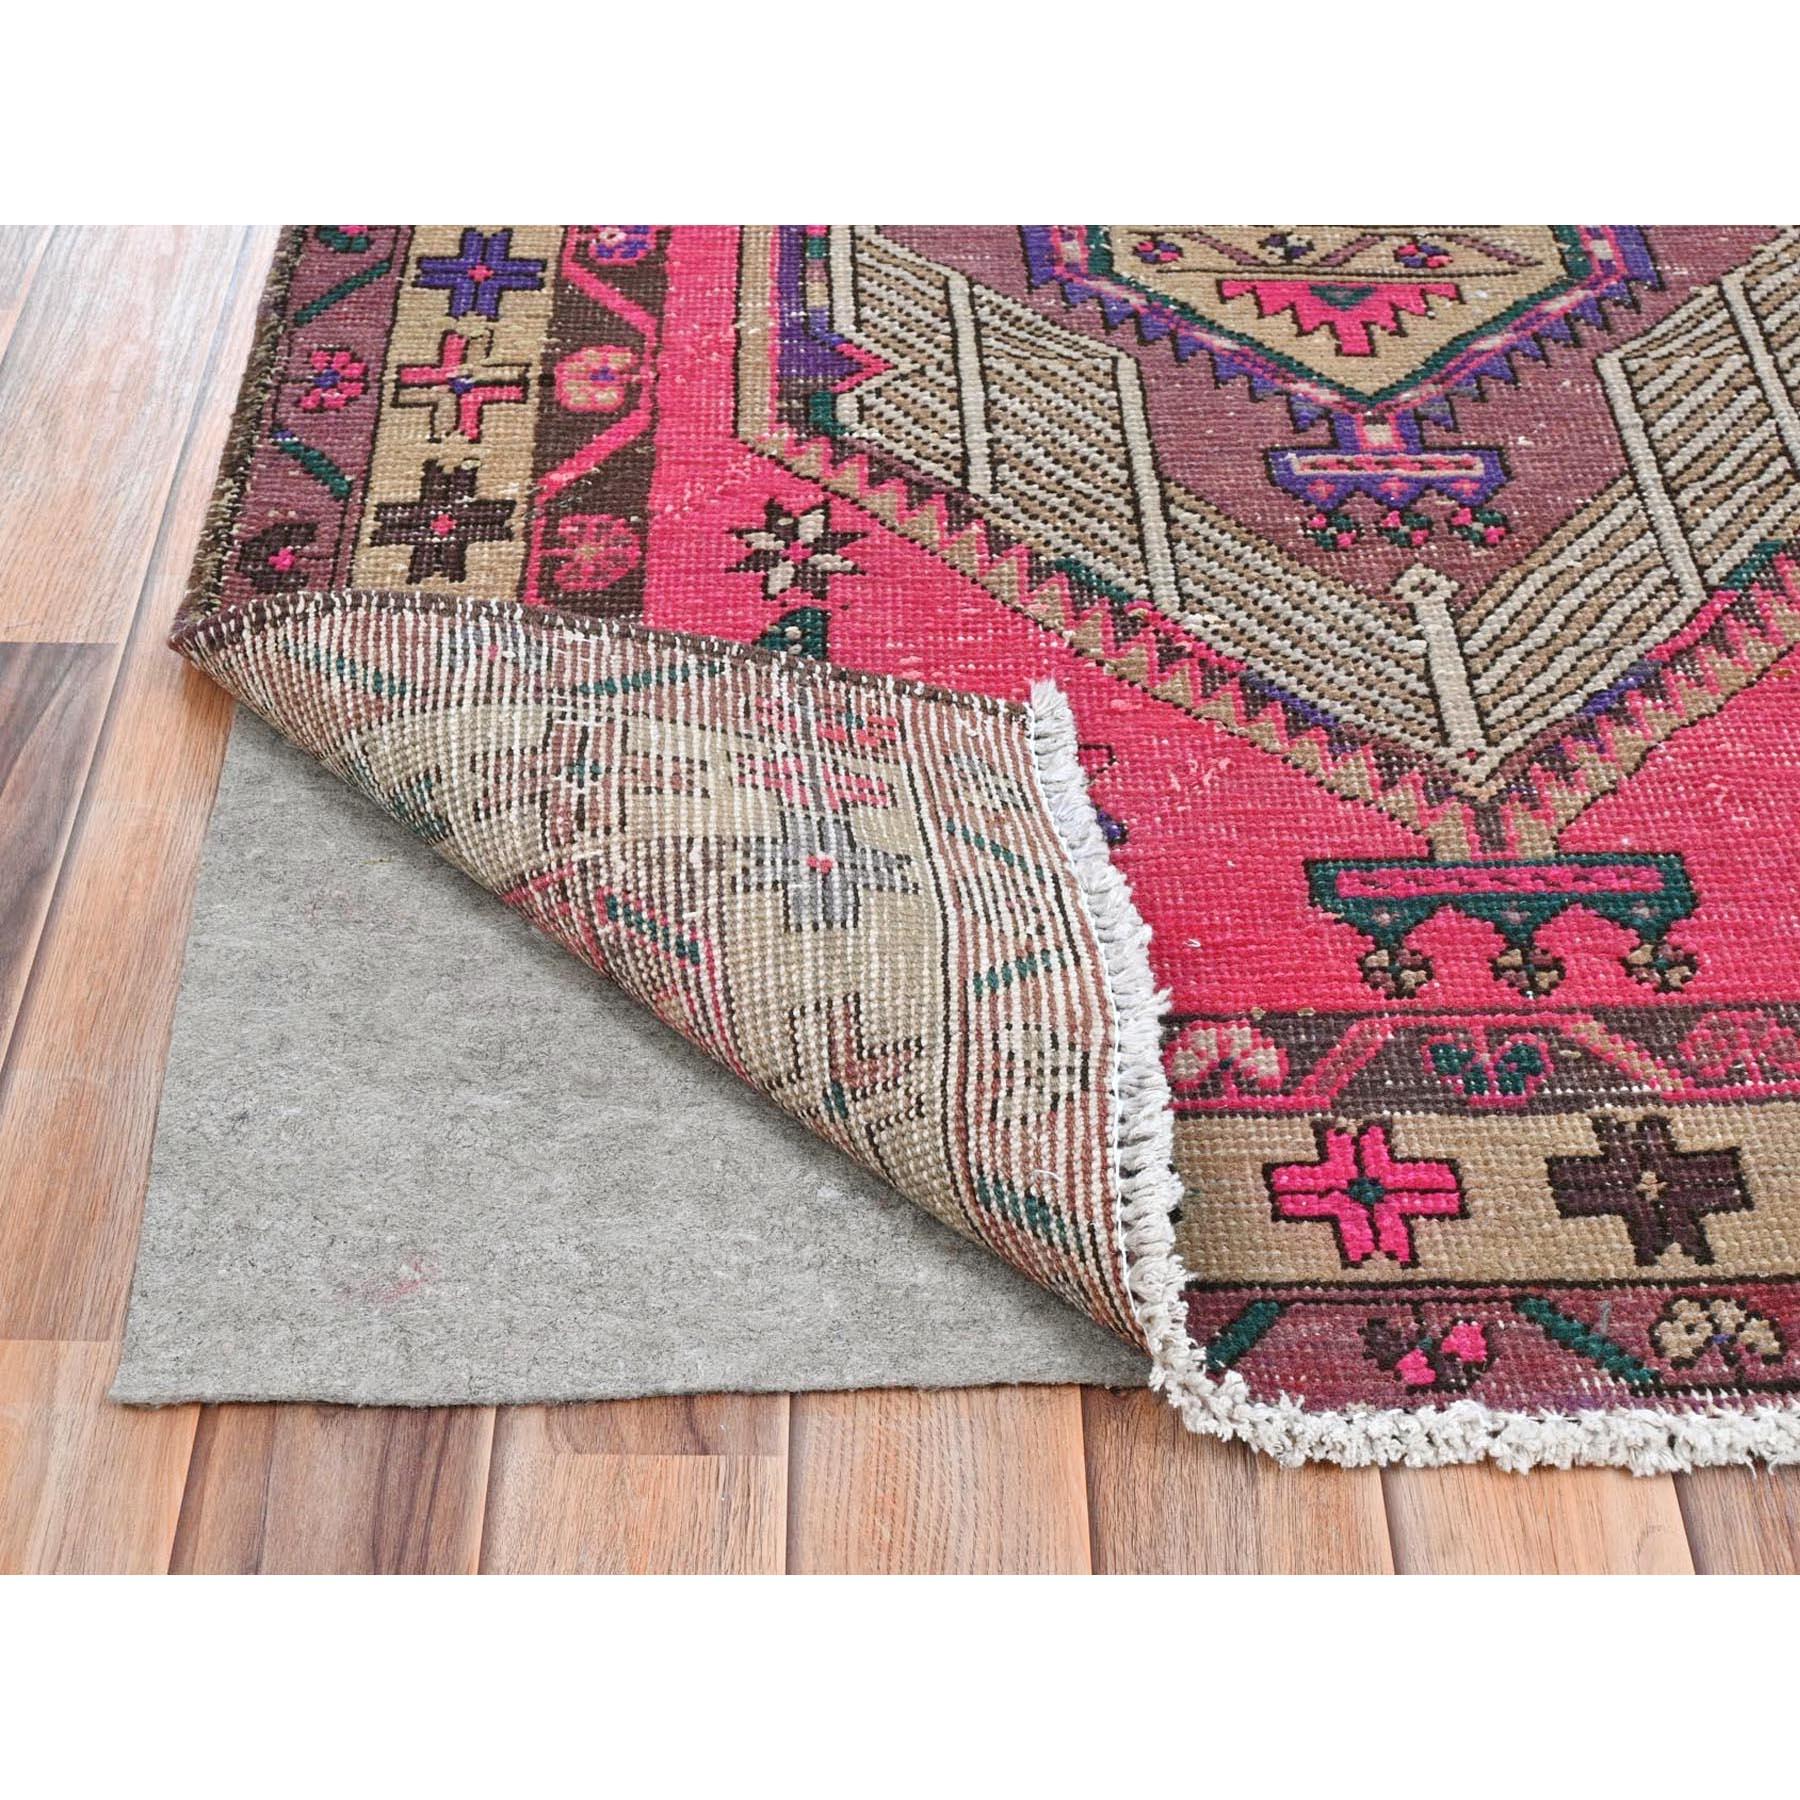 Medieval Hot Pink Vintage Persian Serab, Bohemian, Hand Knotted Worn Wool Runner Rug For Sale